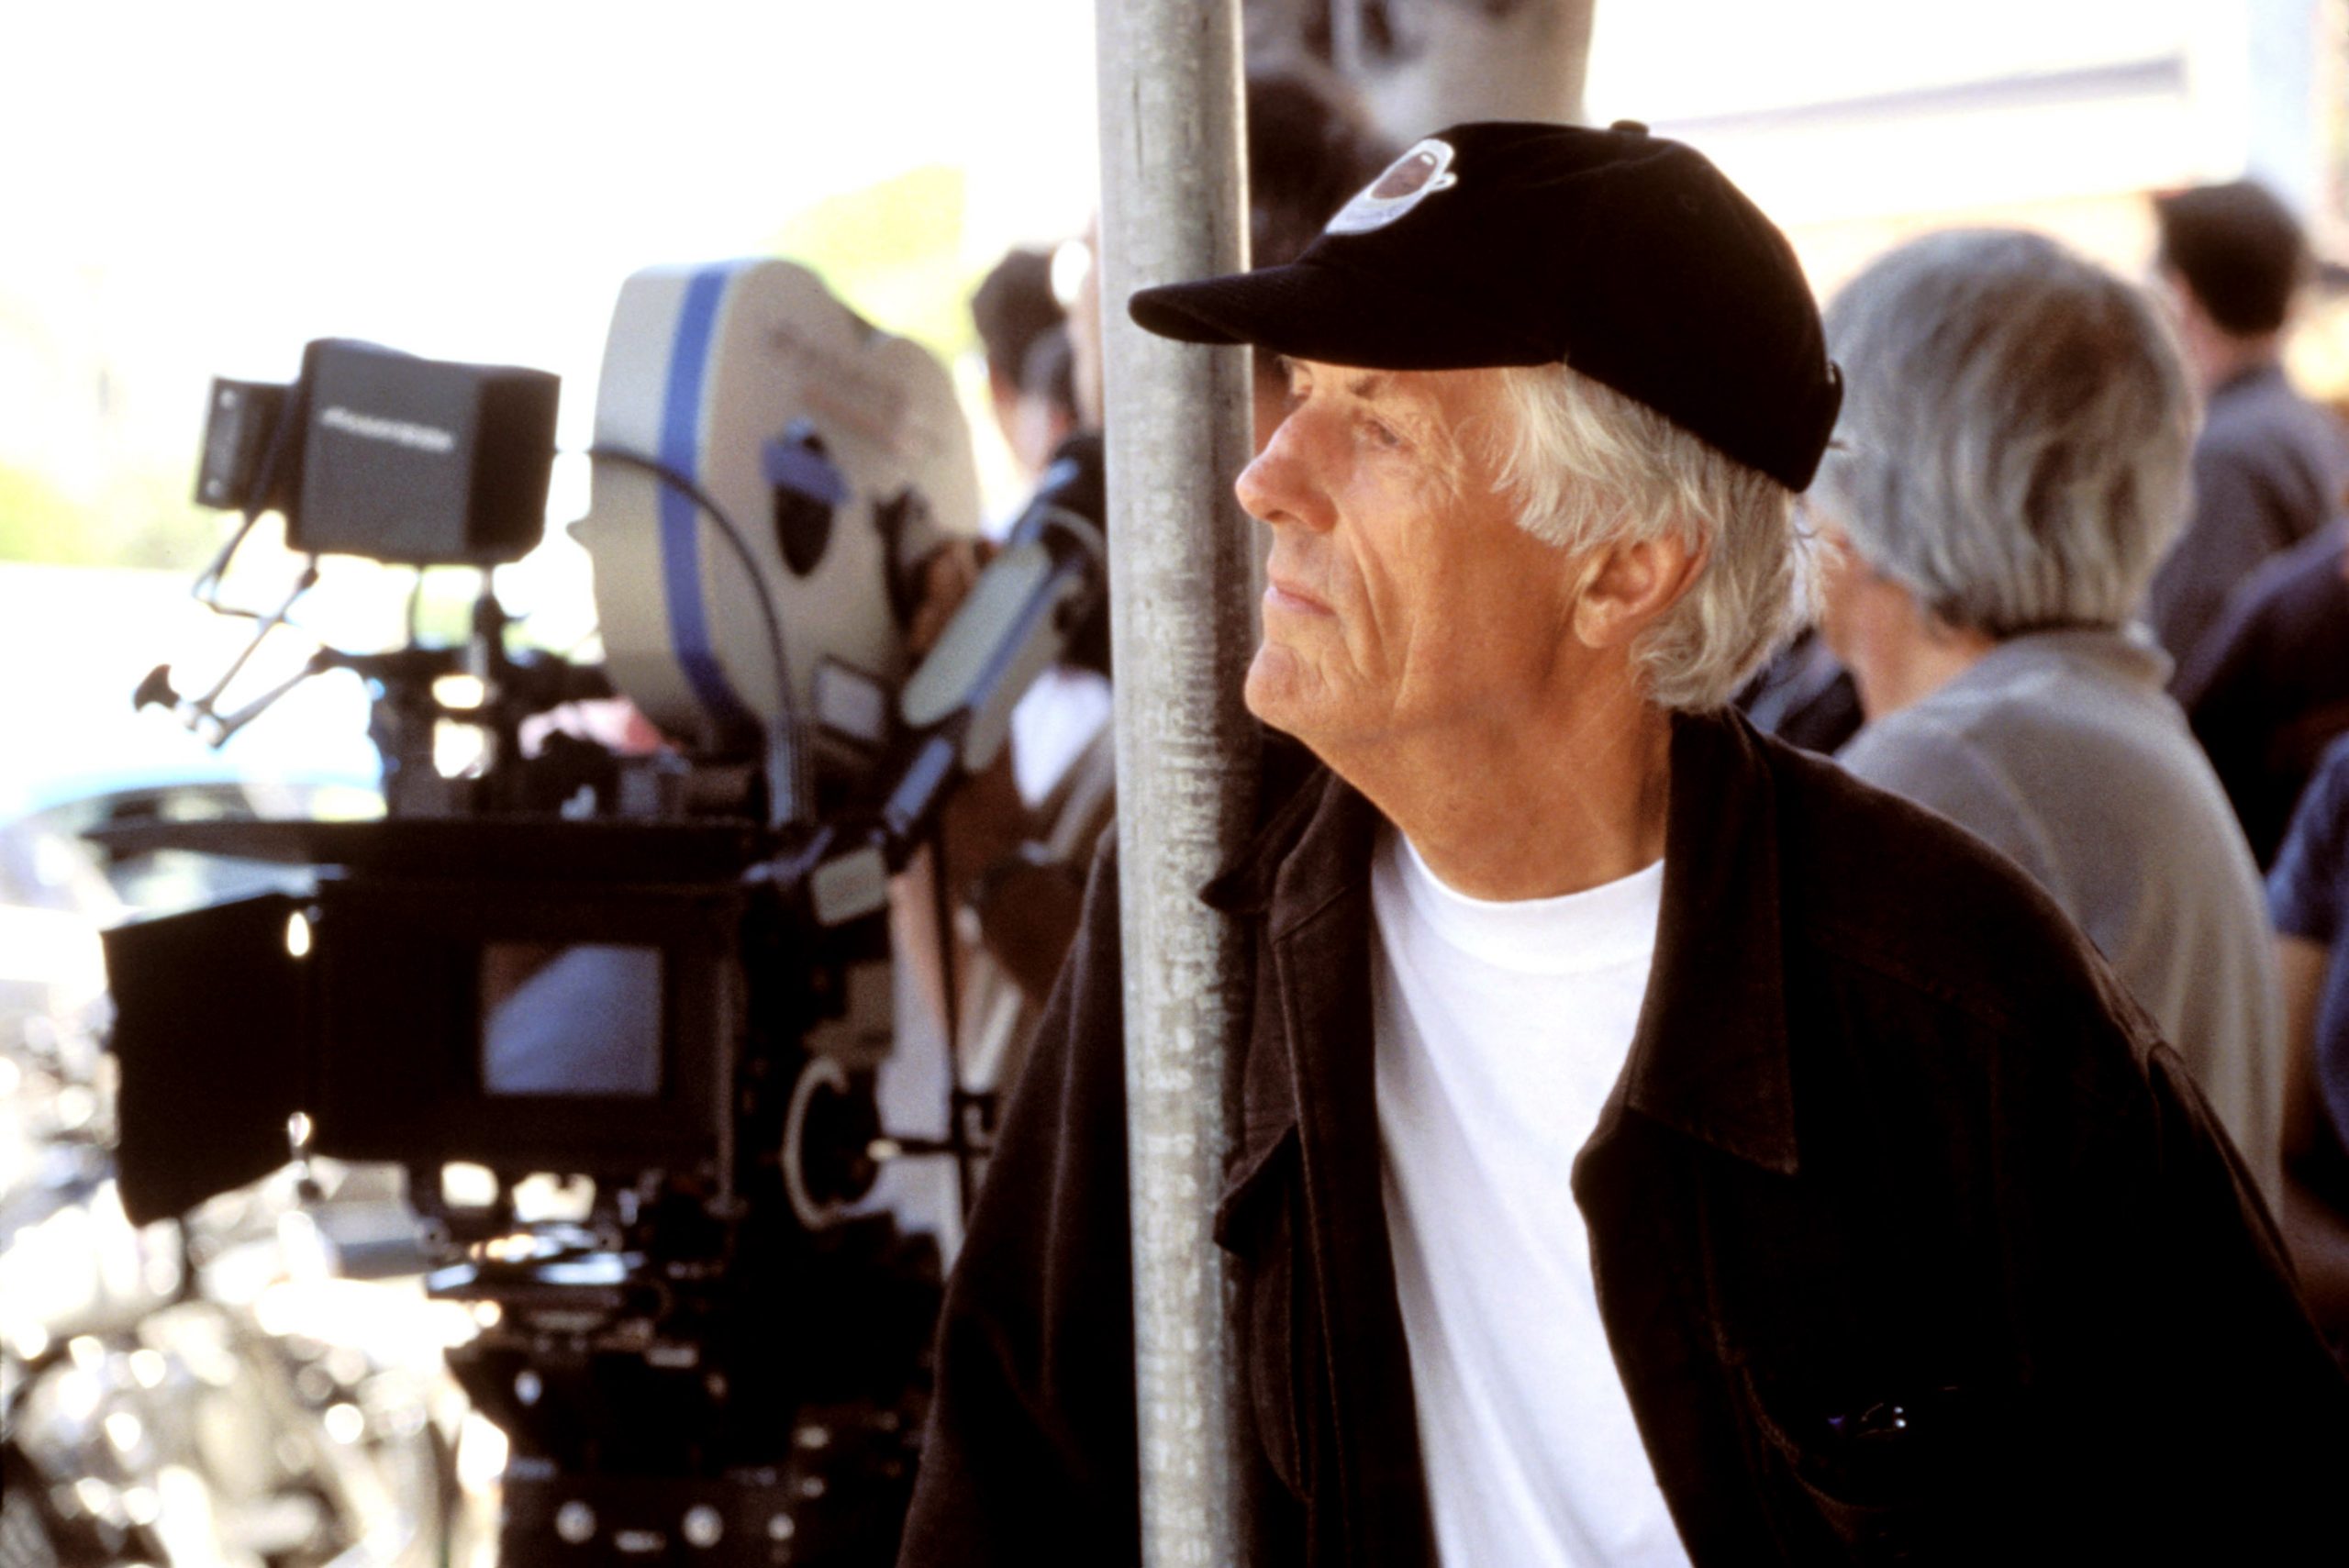 Director Michael Apted on the set of ENOUGH, 2002
(c) Columbia.  Courtesy Everett Collection.